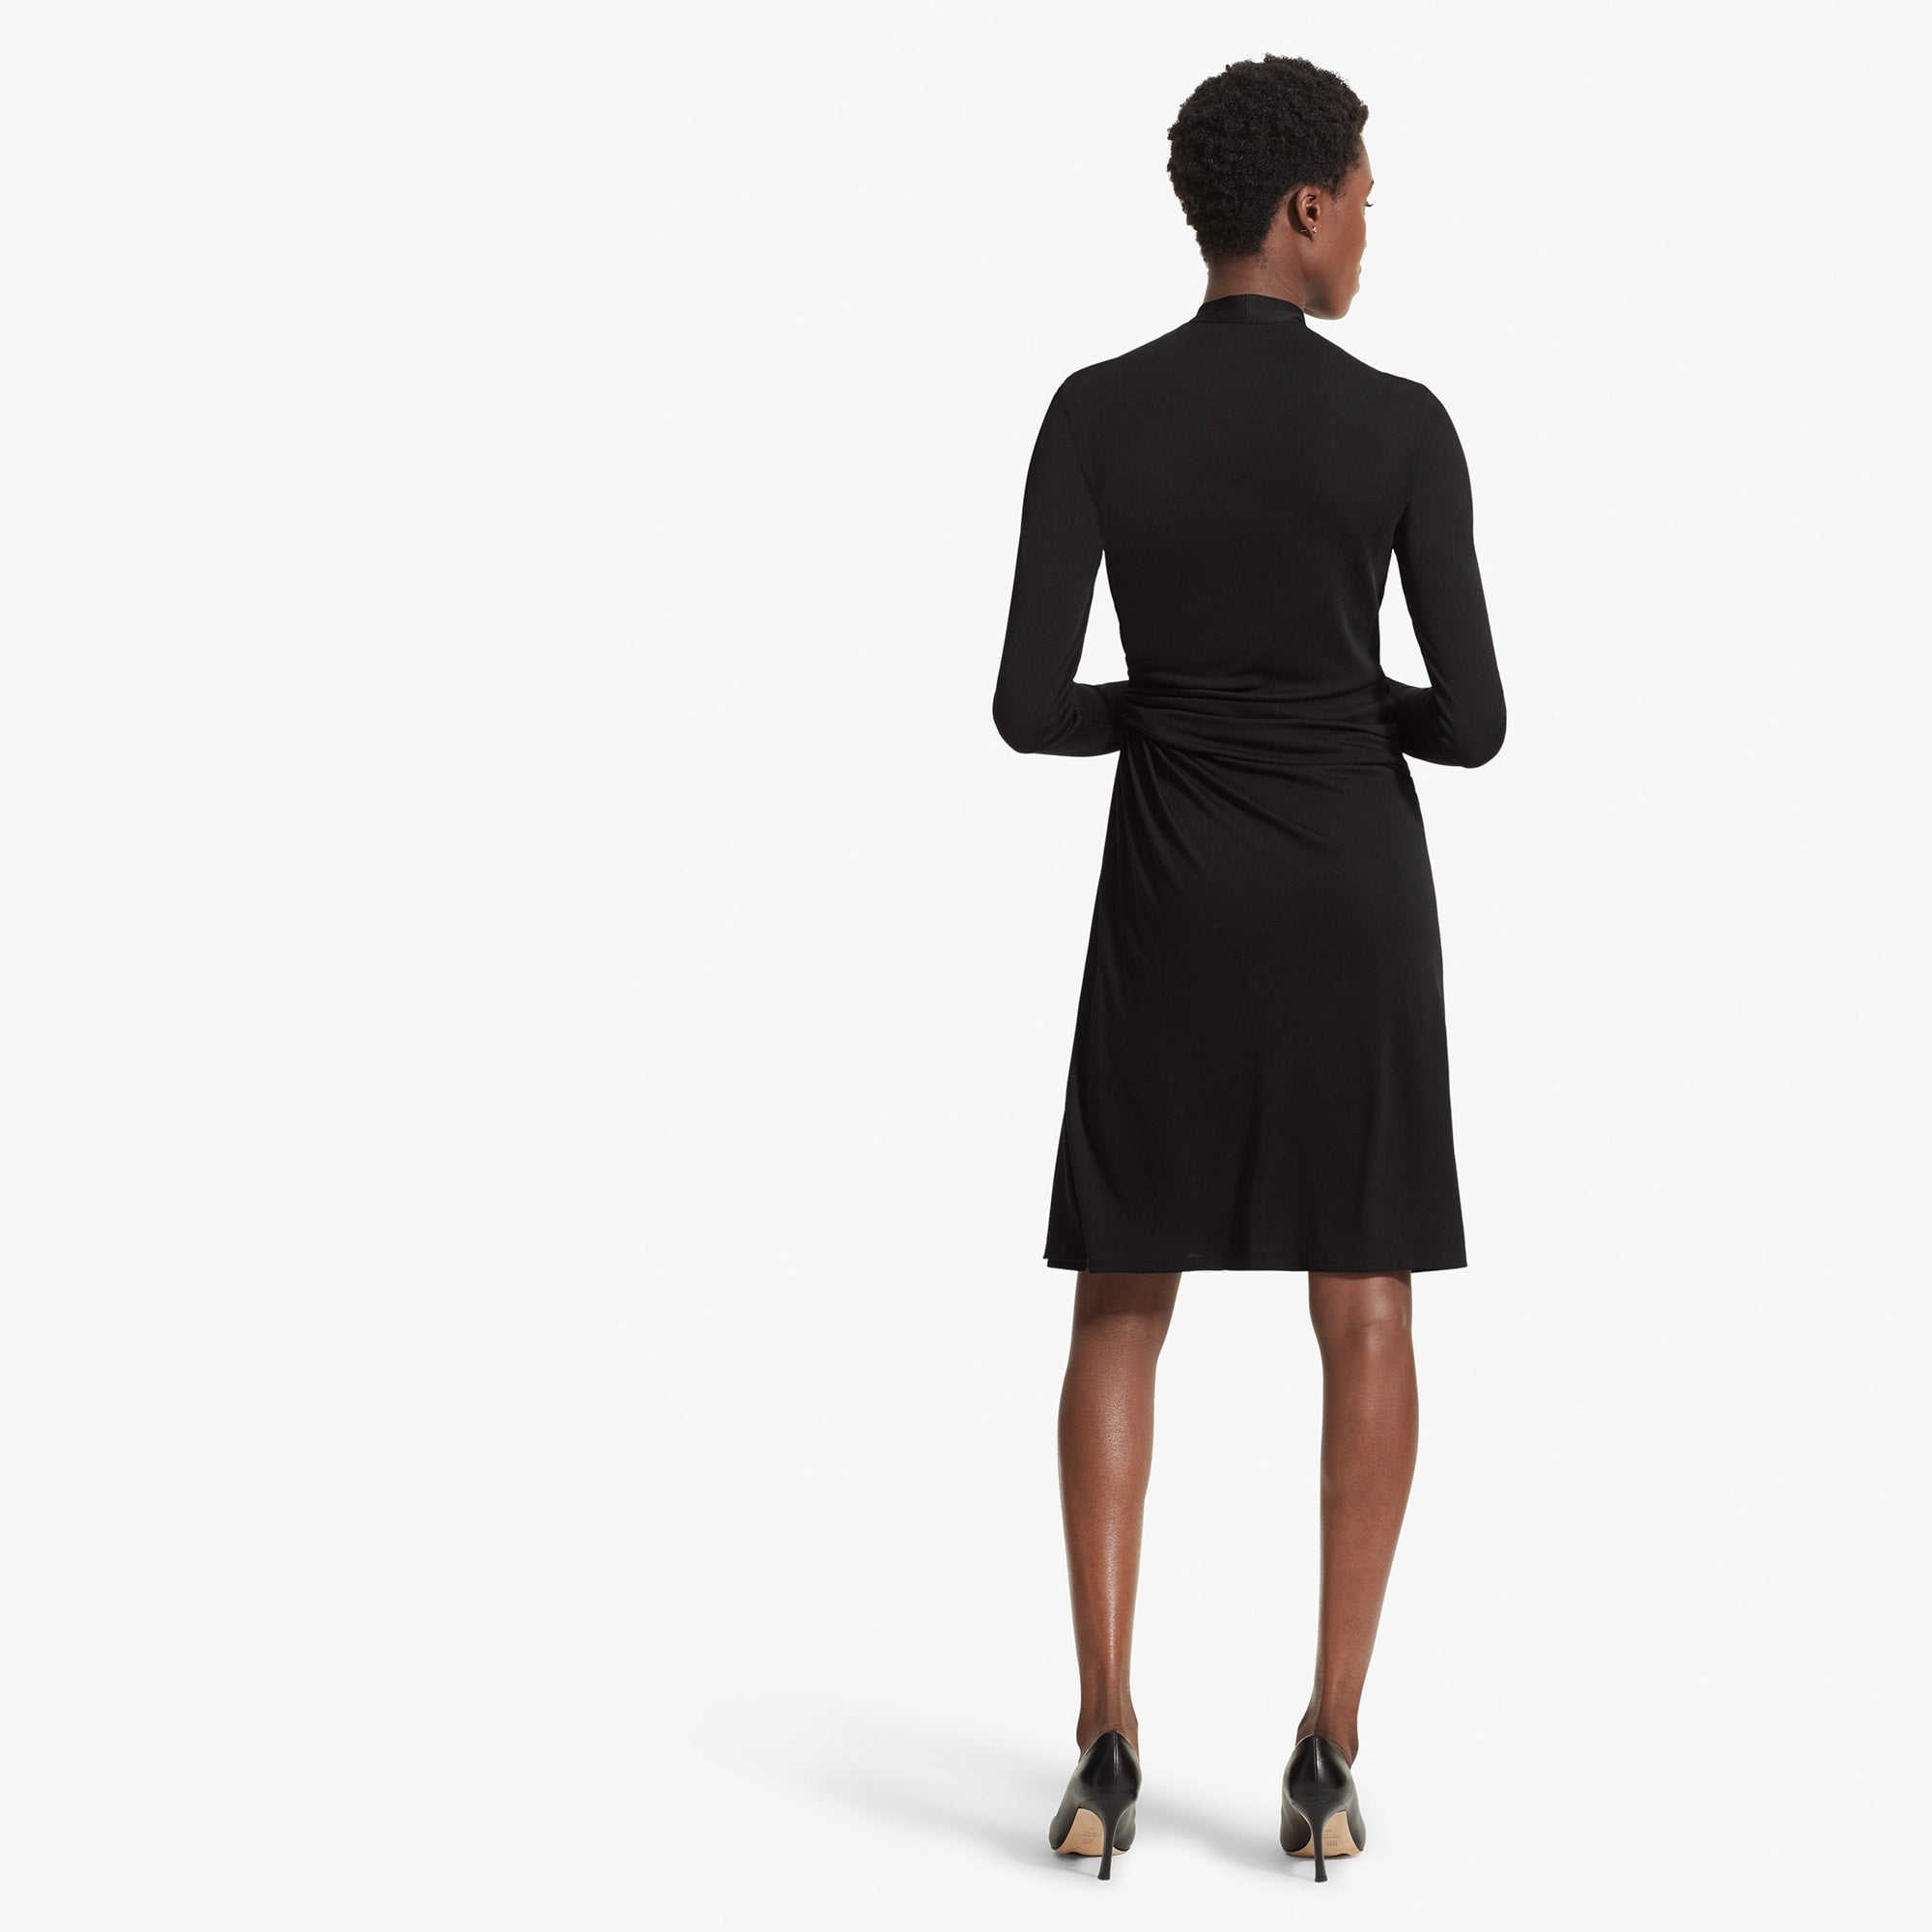 Back image of a woman standing wearing the Morgan dress in Black